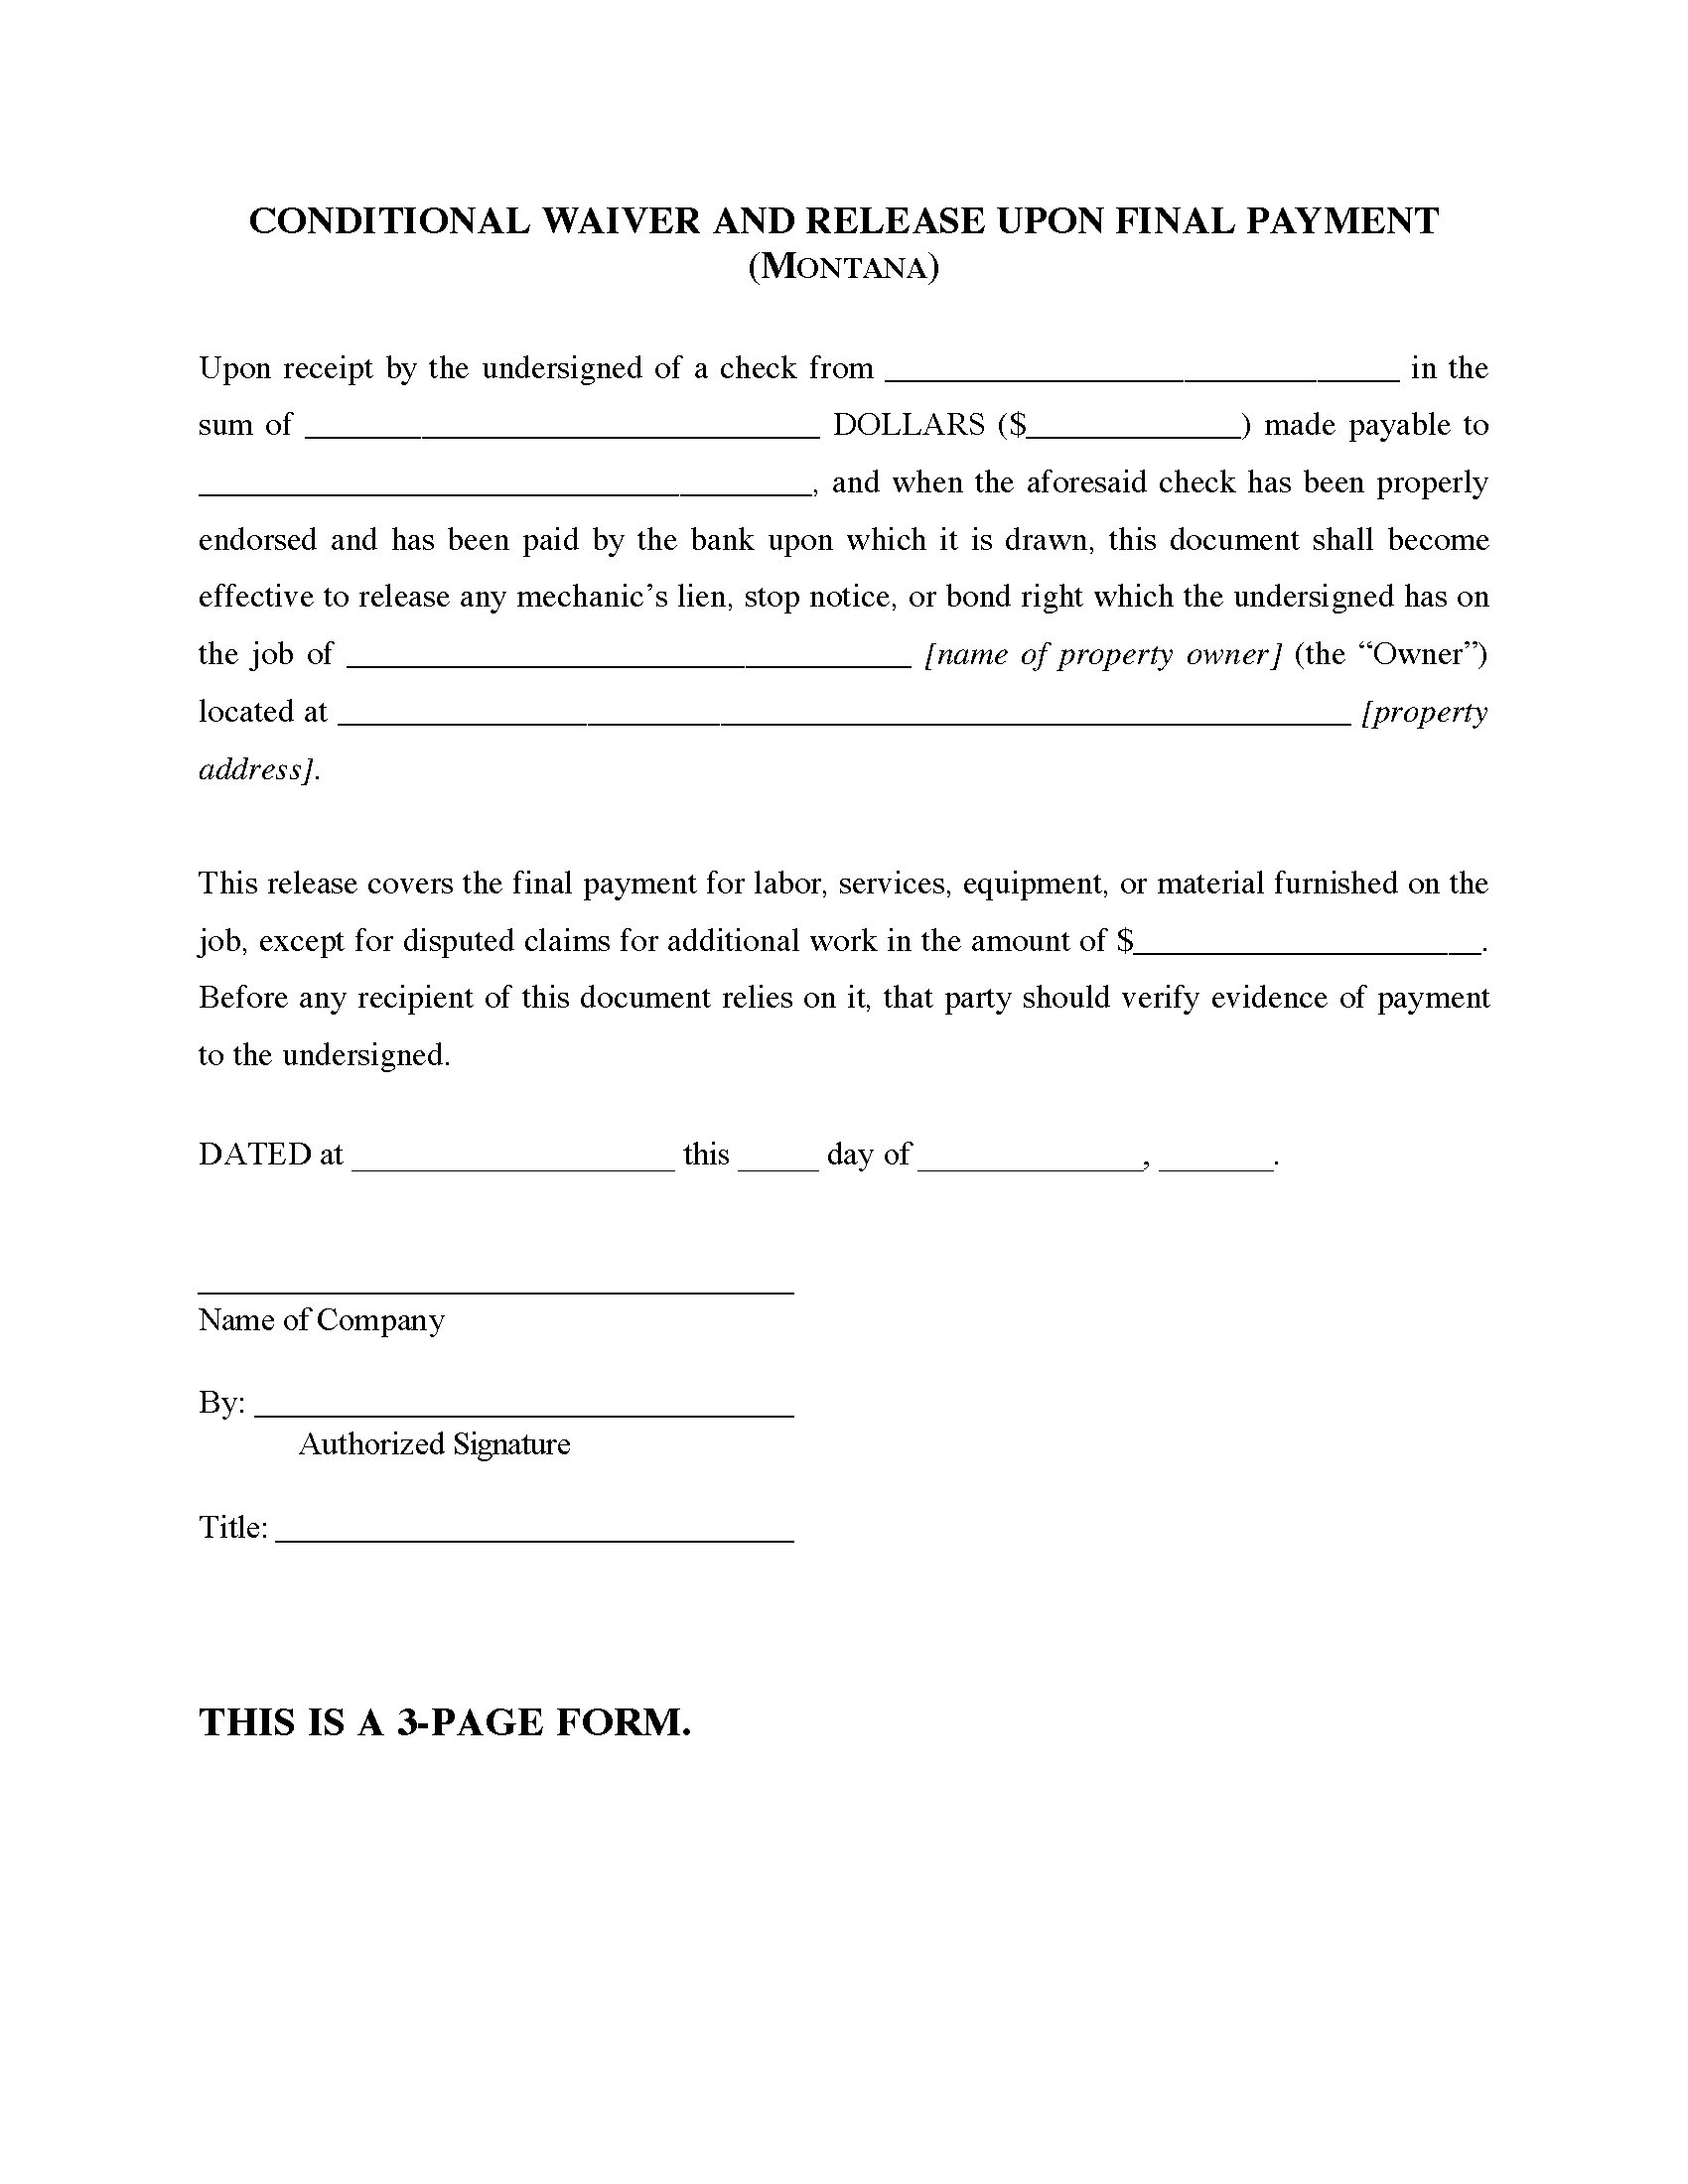 Montana Conditional Waiver And Release Of Lien Upon Final Payment Legal Forms And Business Templates Megadox Com